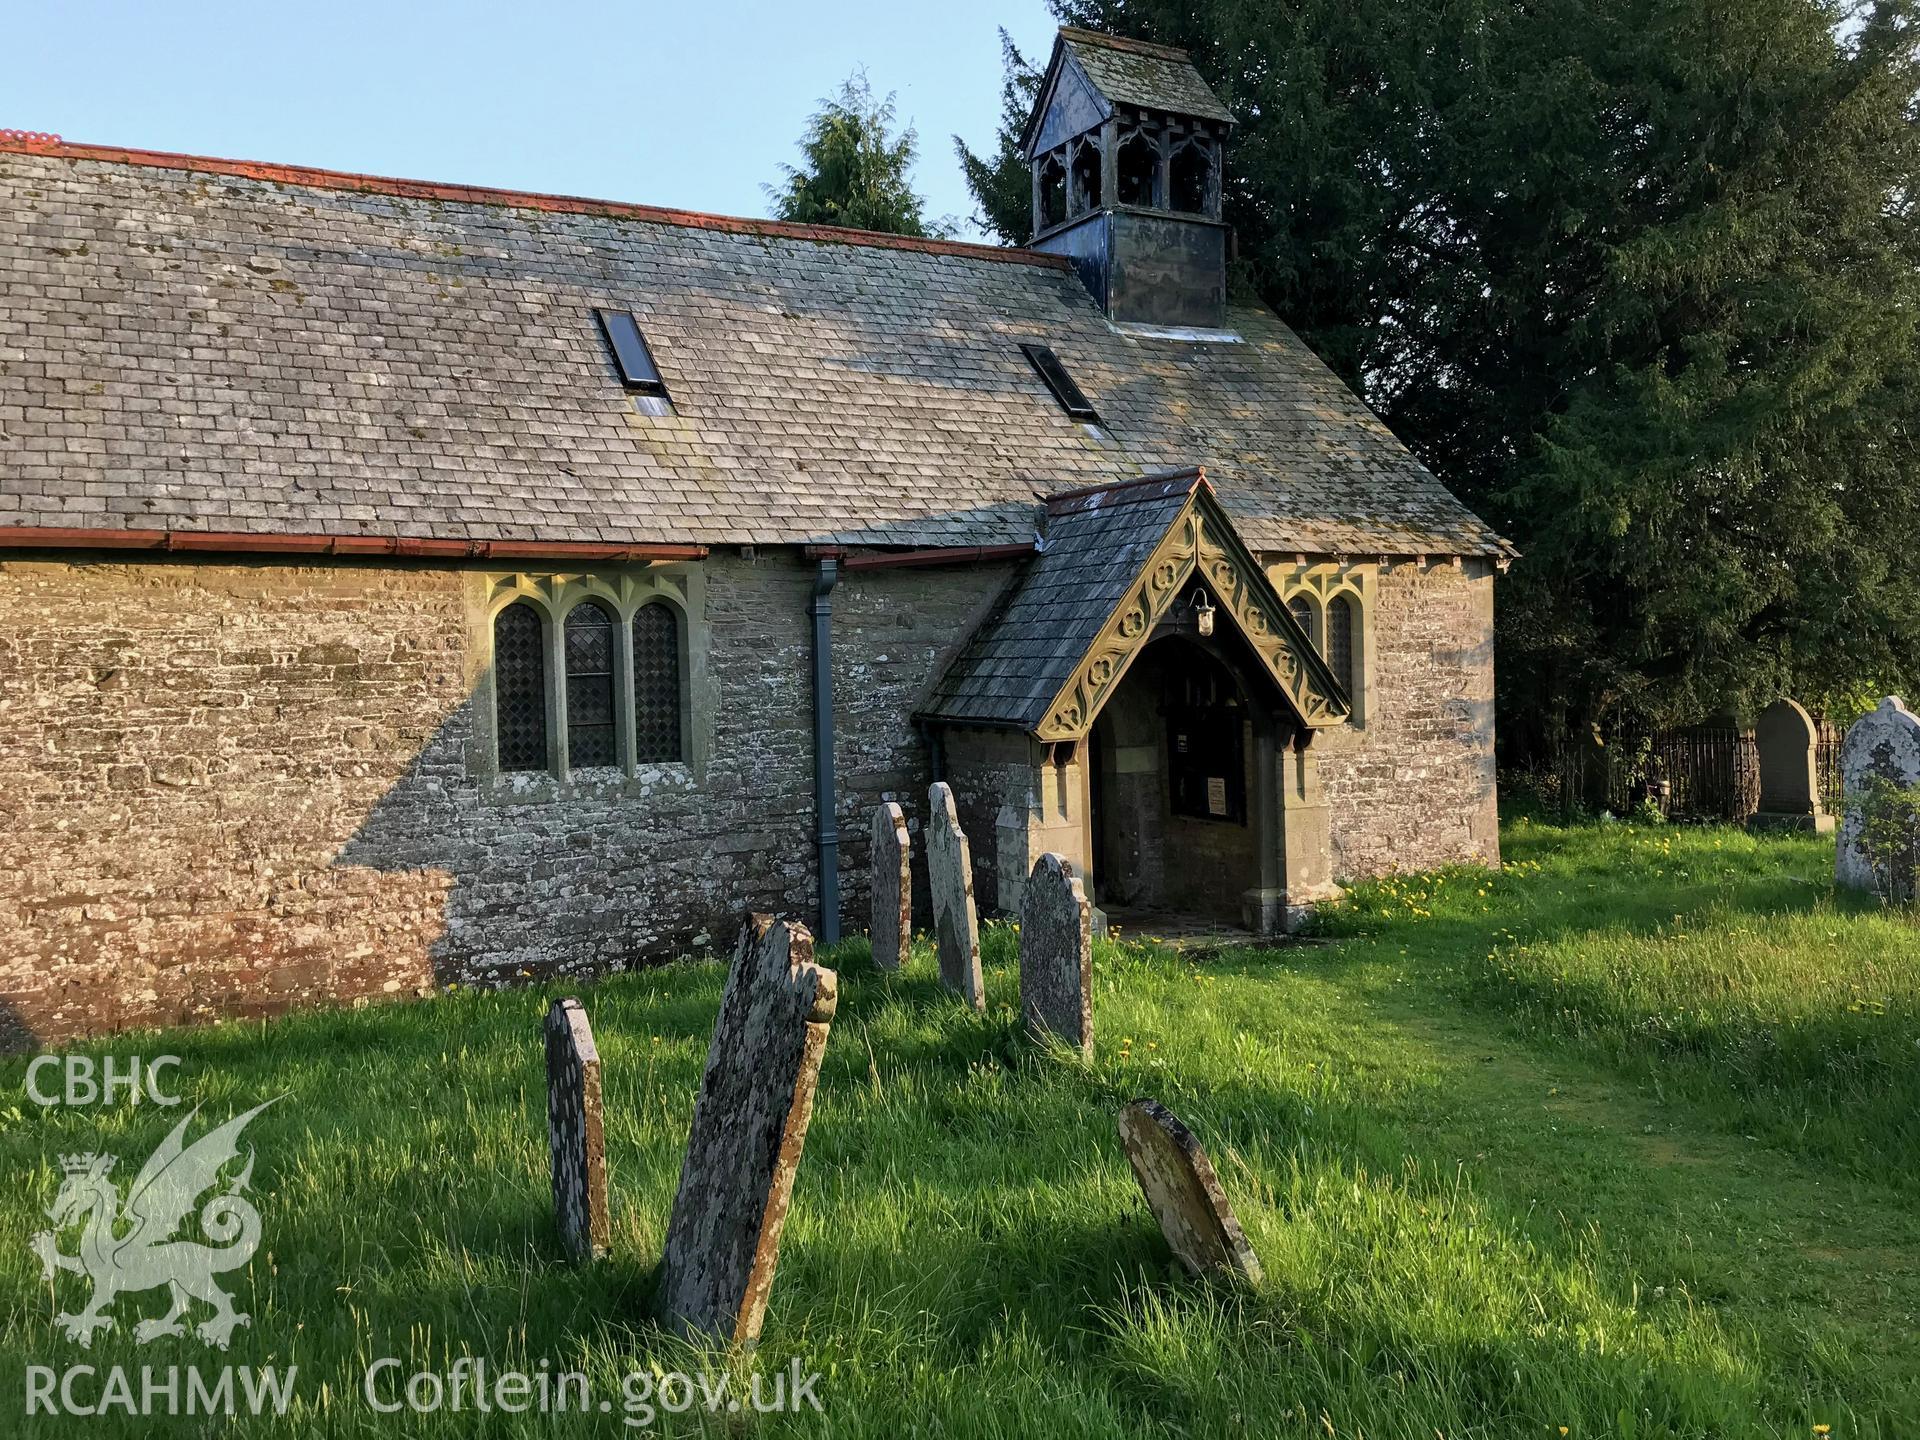 Colour photo showing exterior view of St Cynog's church, Battle, taken by Paul R. Davis, 7th May 2018.